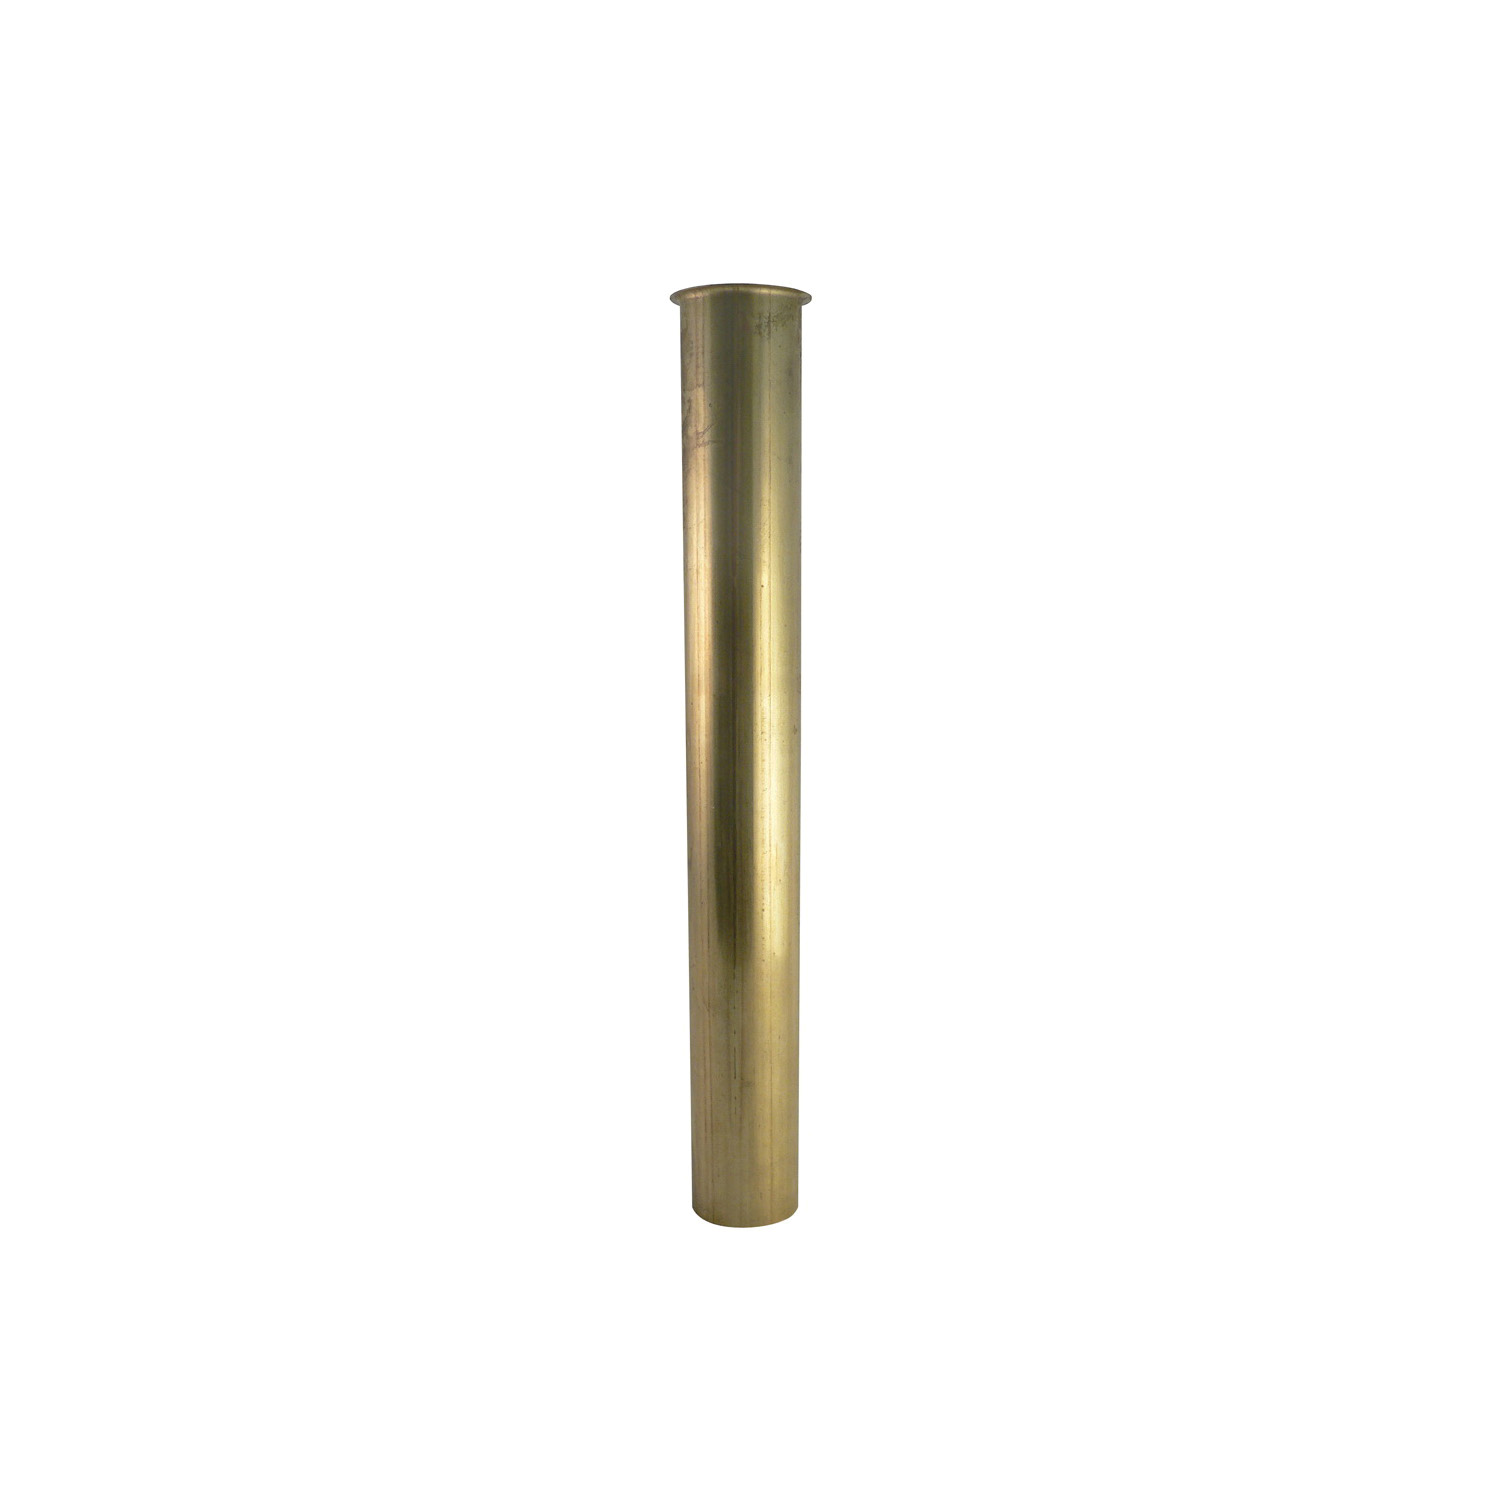 Keeney 214RB Flanged Sink Tailpiece, 1-1/2 in ID x 12 in L, Brass